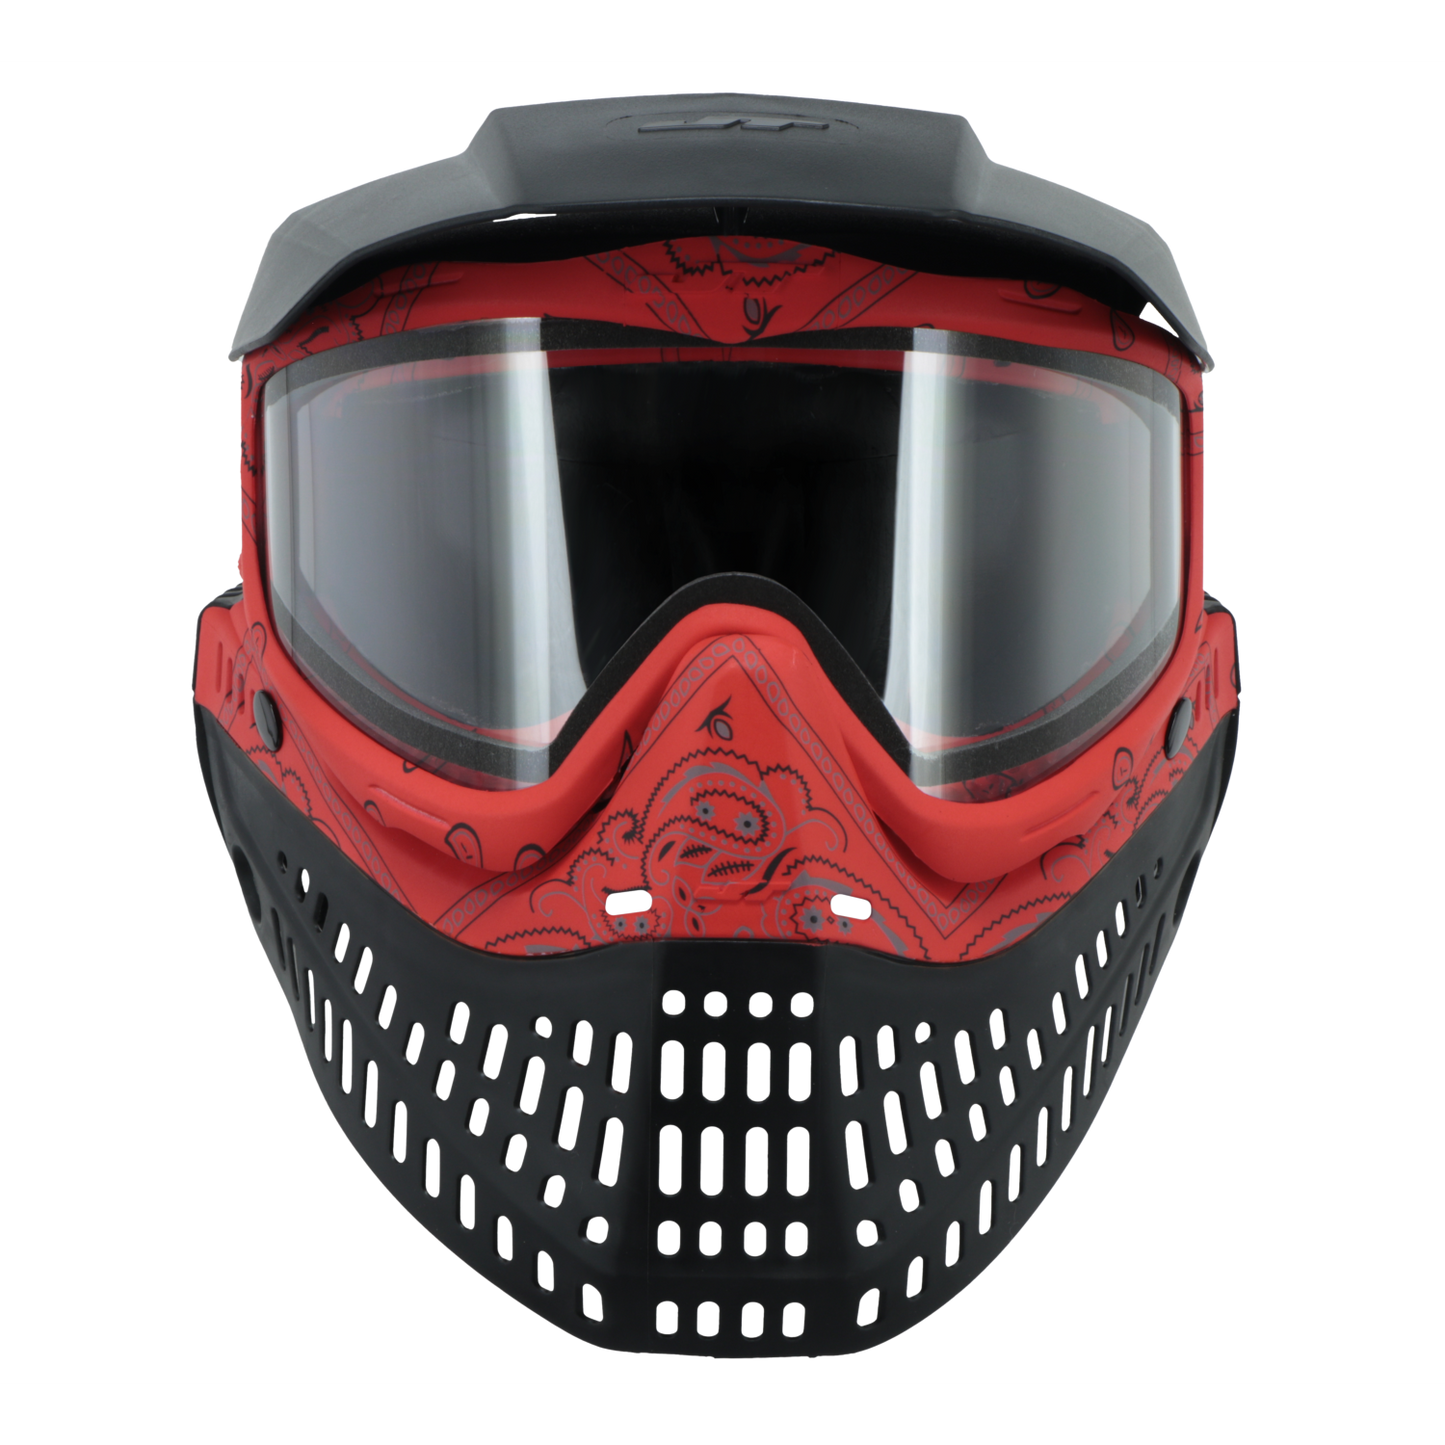 JT Paintball Spectra Proflex Goggle - Bandana Red Limited Edition - with lens [Thermal Clear & Thermal Smoke]